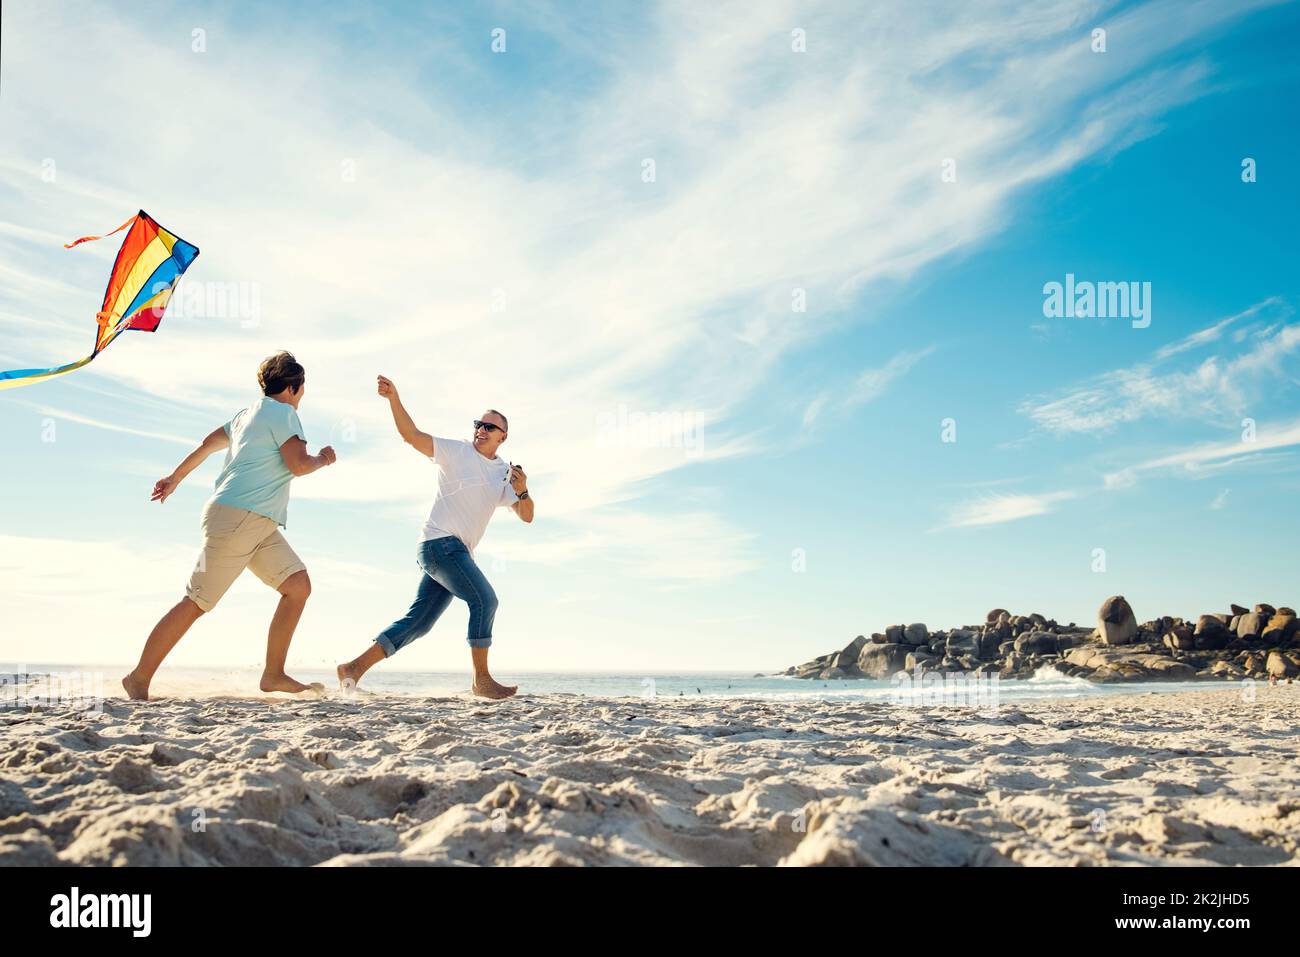 Kites bring joy to people of all ages. Shot of a mature couple on the beach with a kite. Stock Photo